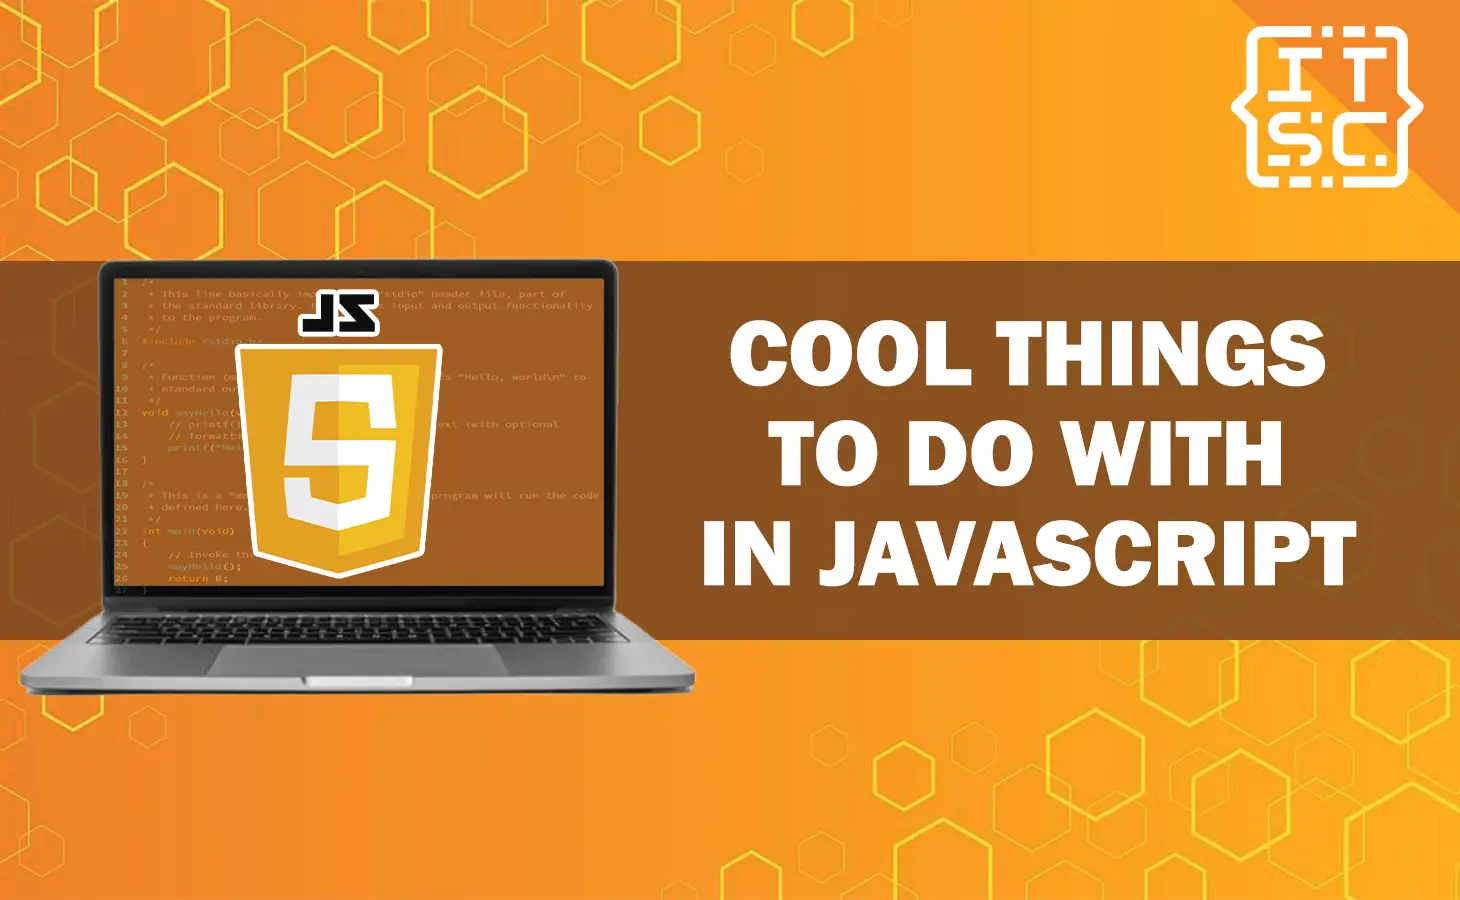 What are the cool things to do with JavaScript?